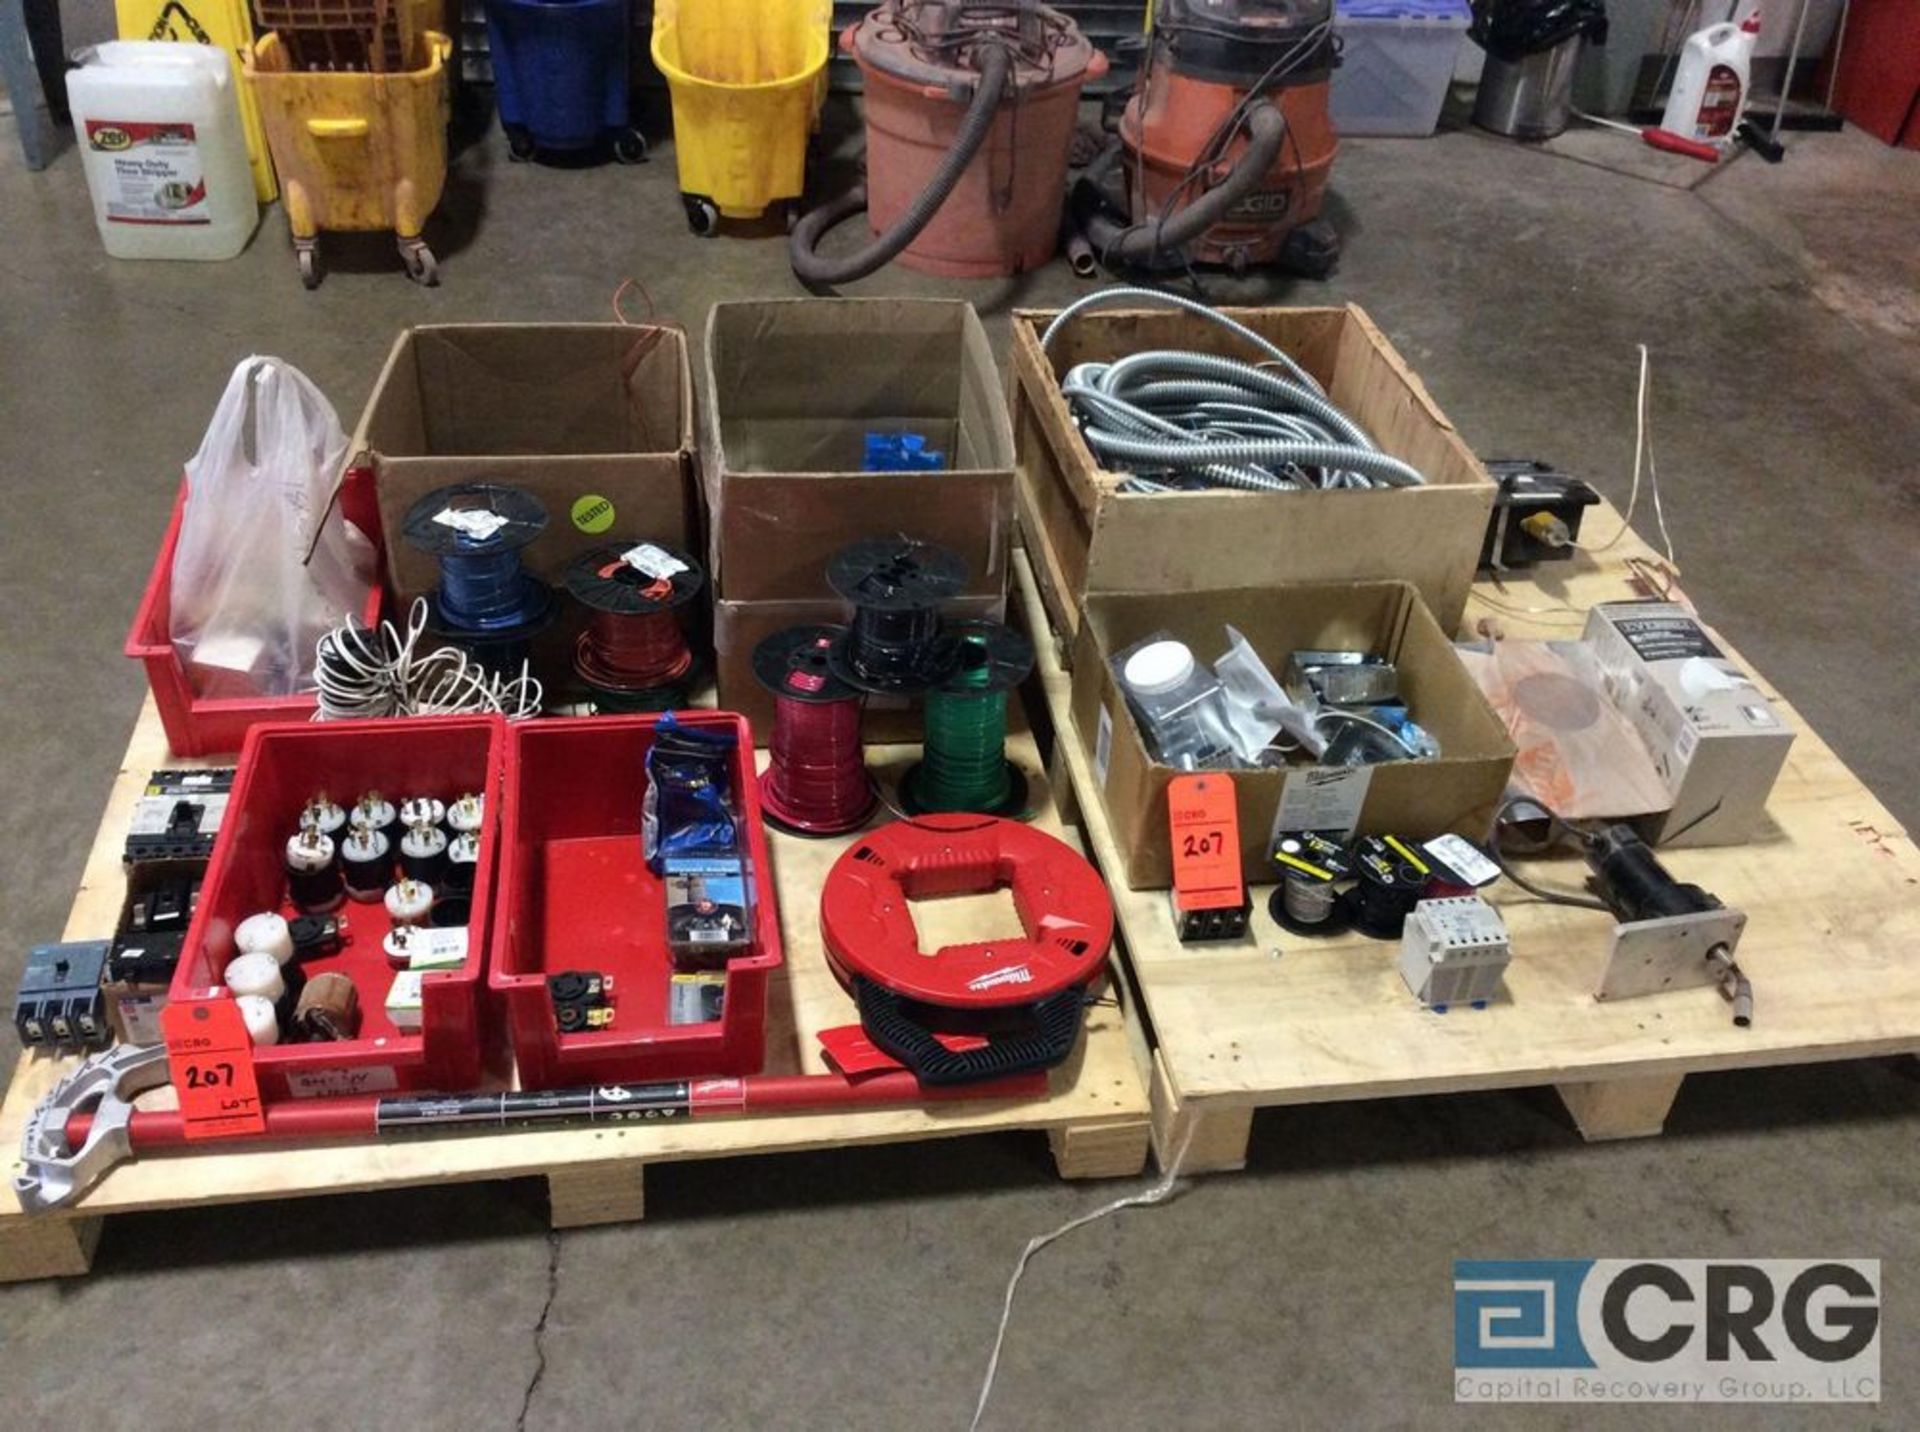 Lot of asst electrical supplies including spool wire, fish tape, bender, plugs, flex tube and boxes.